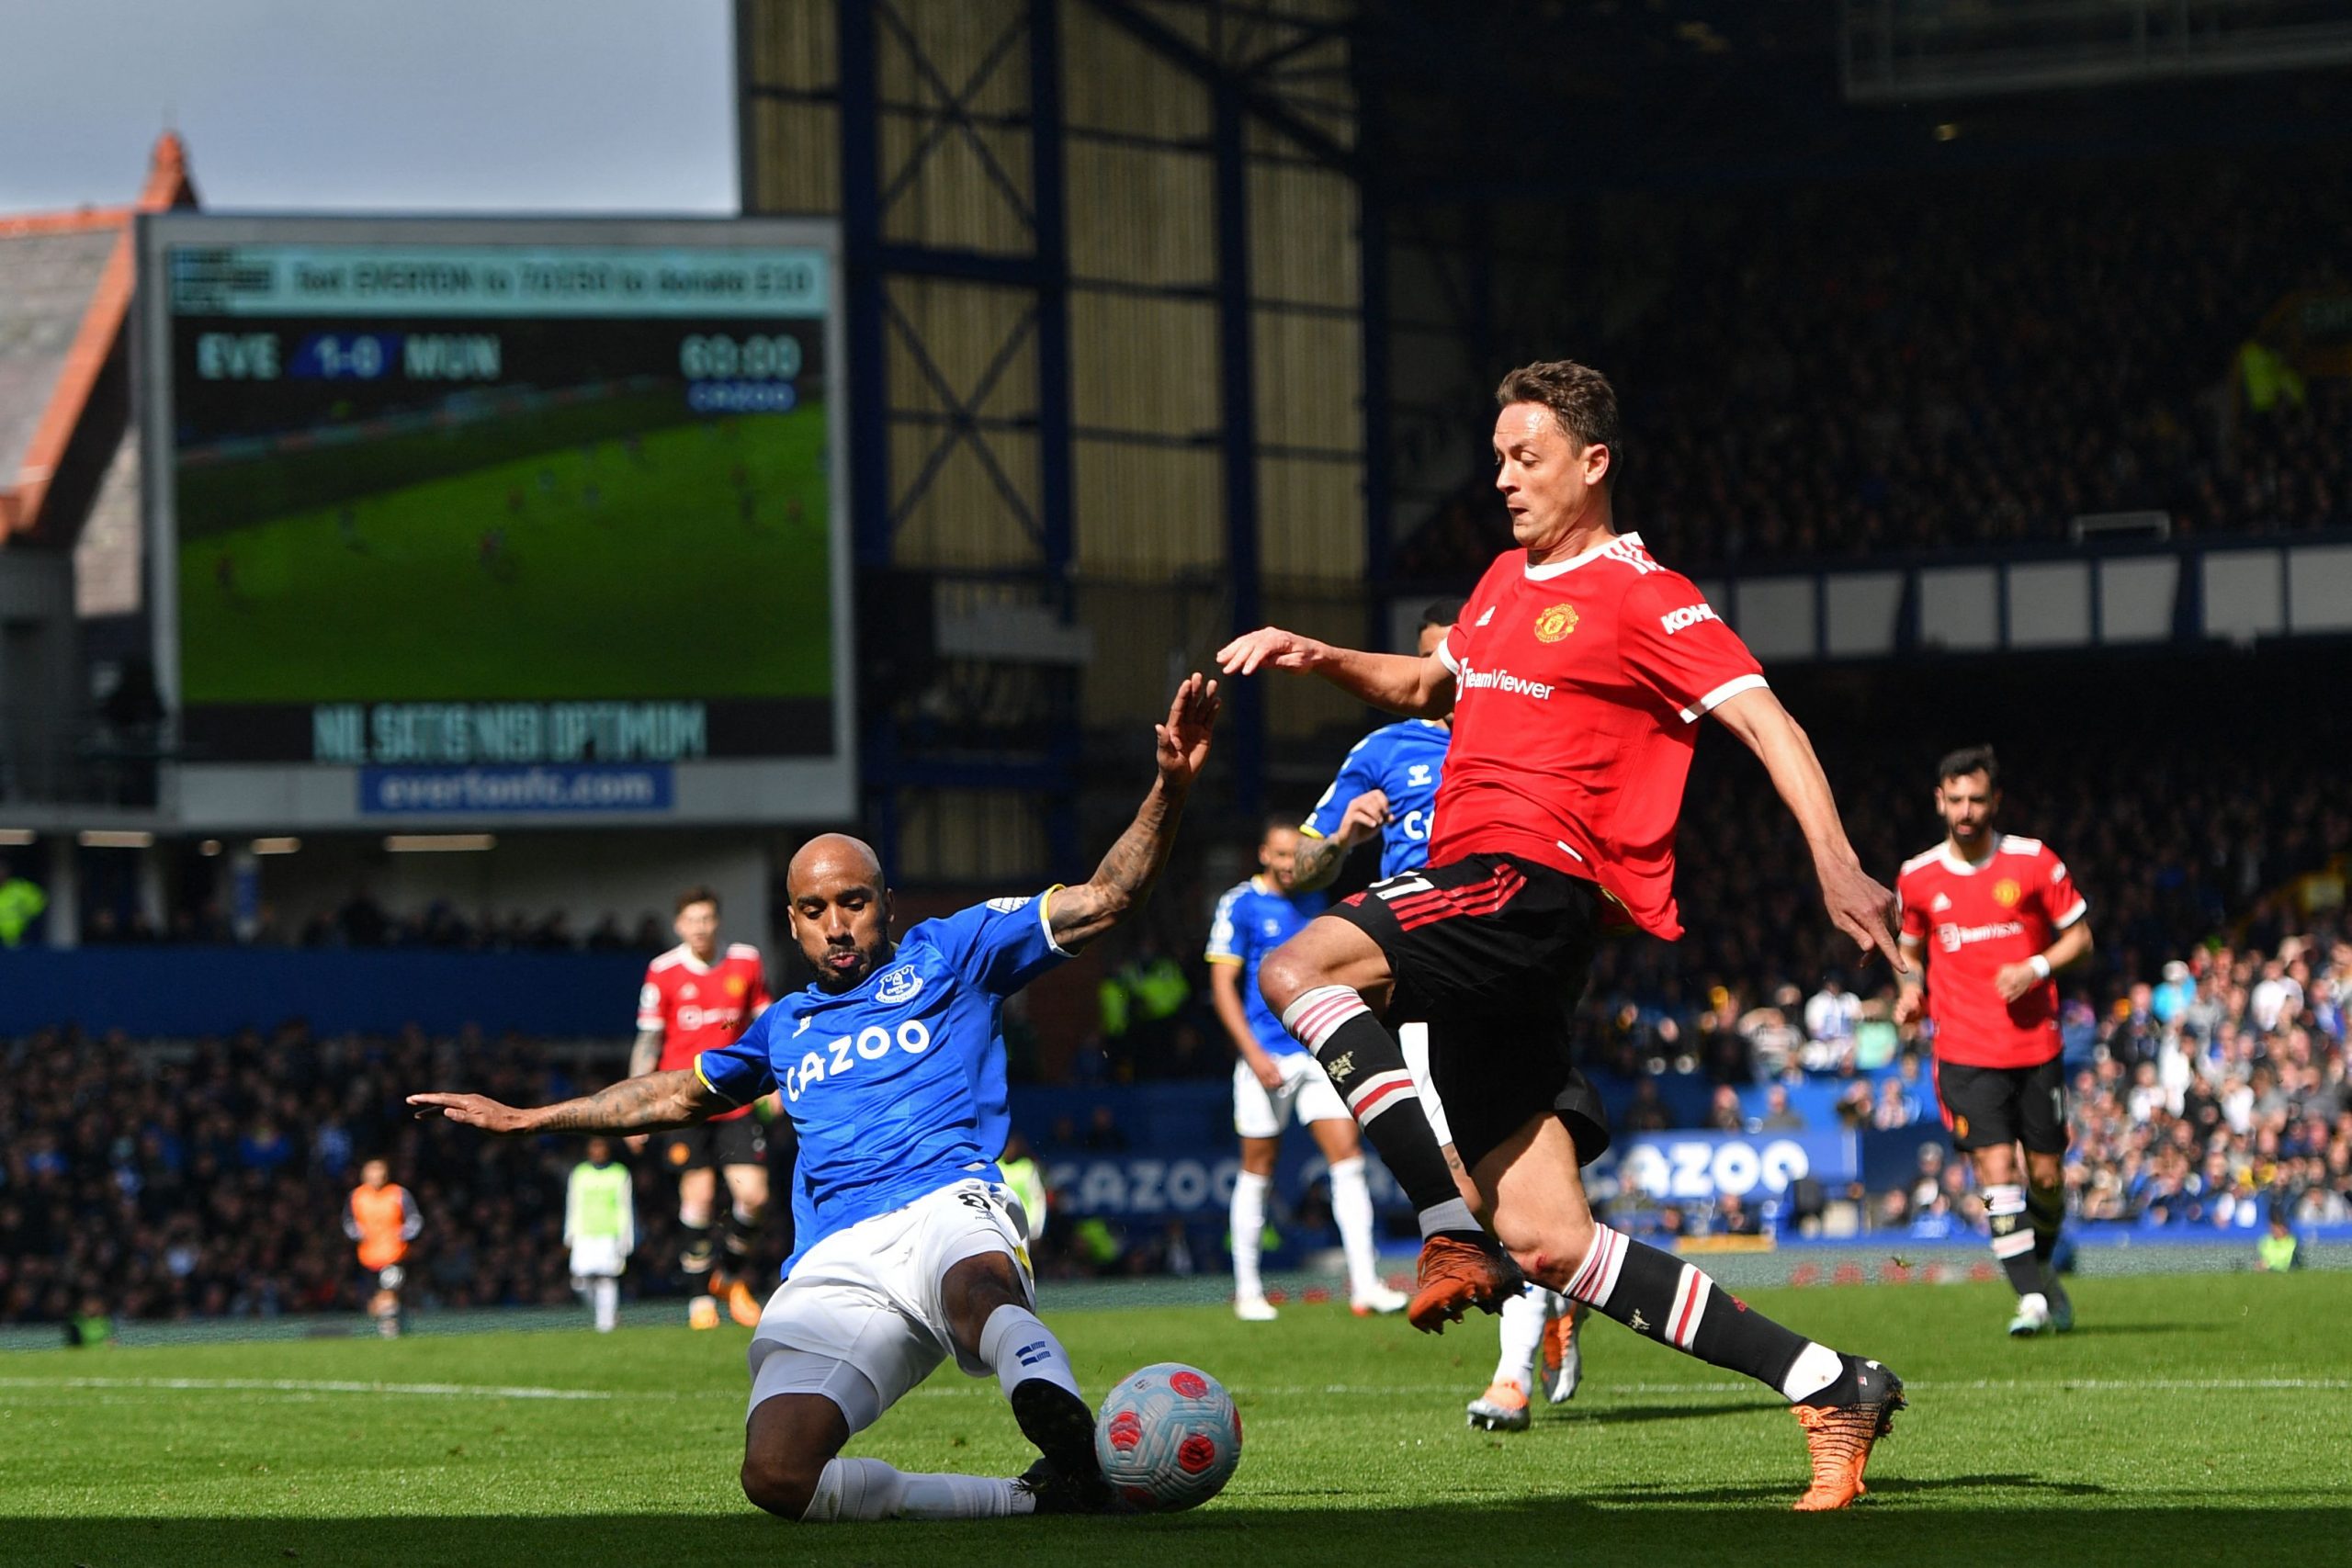 Manchester United Players Rated In Poor Loss Vs Everton- The 4th Official